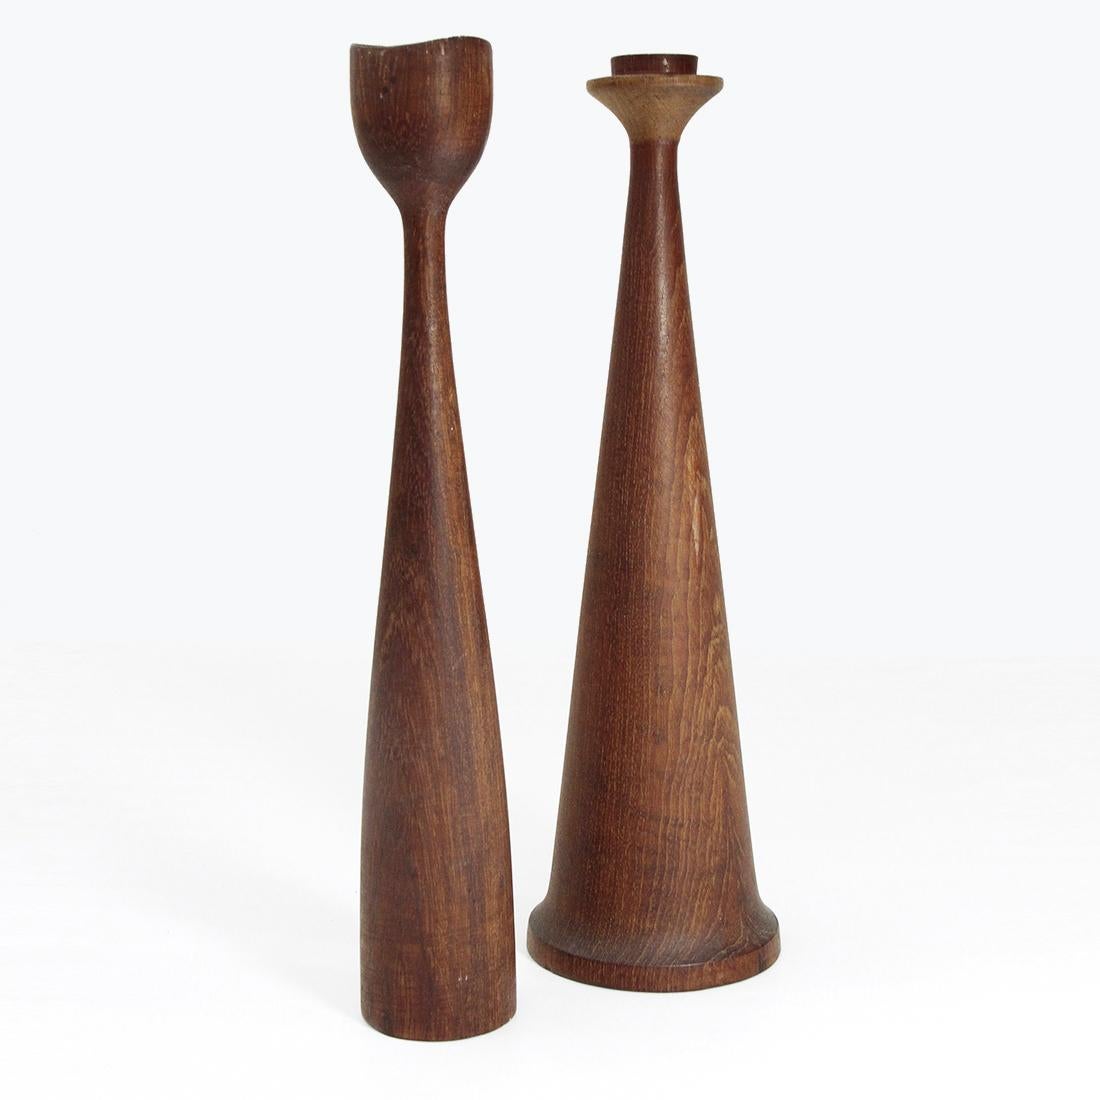 Pair of candlestick of Scandinavian manufacture products in the 1950s.
Smooth teak structure.
Brass candle housing.
Good condition, some signs due to normal use over time, small lack on the edge of a candlestick.

Dimensions:
Large